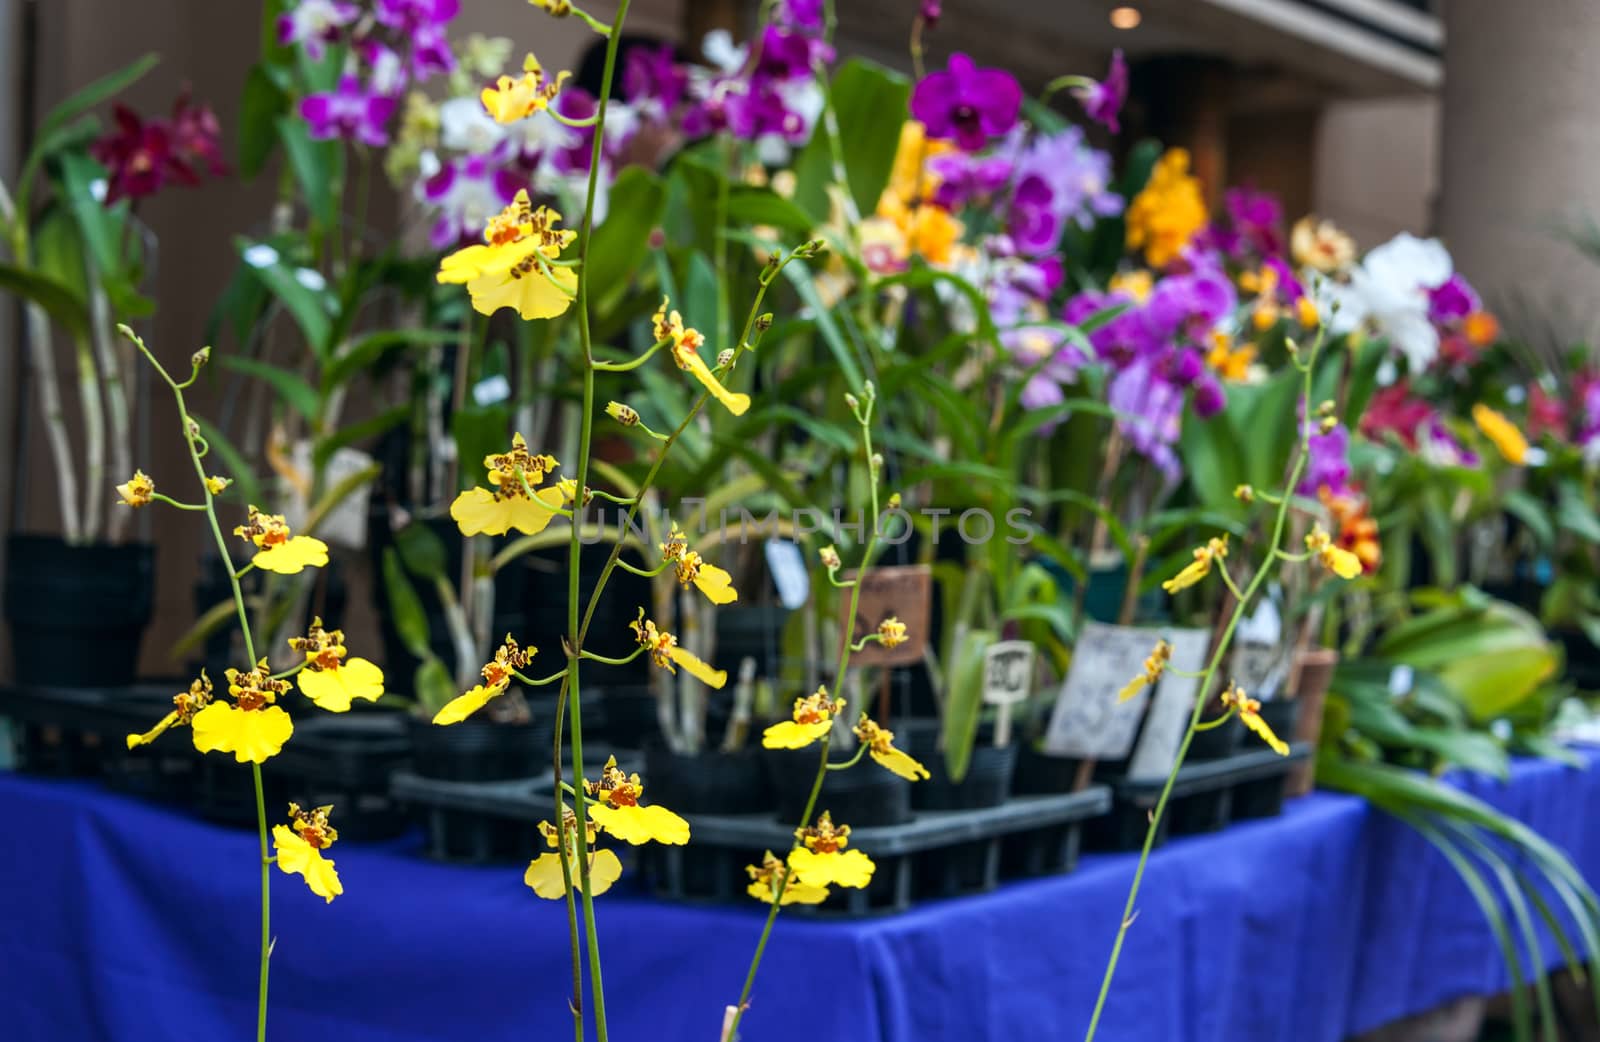 Orchids for sale, Street market in Asuncion, Paraguay. by xura